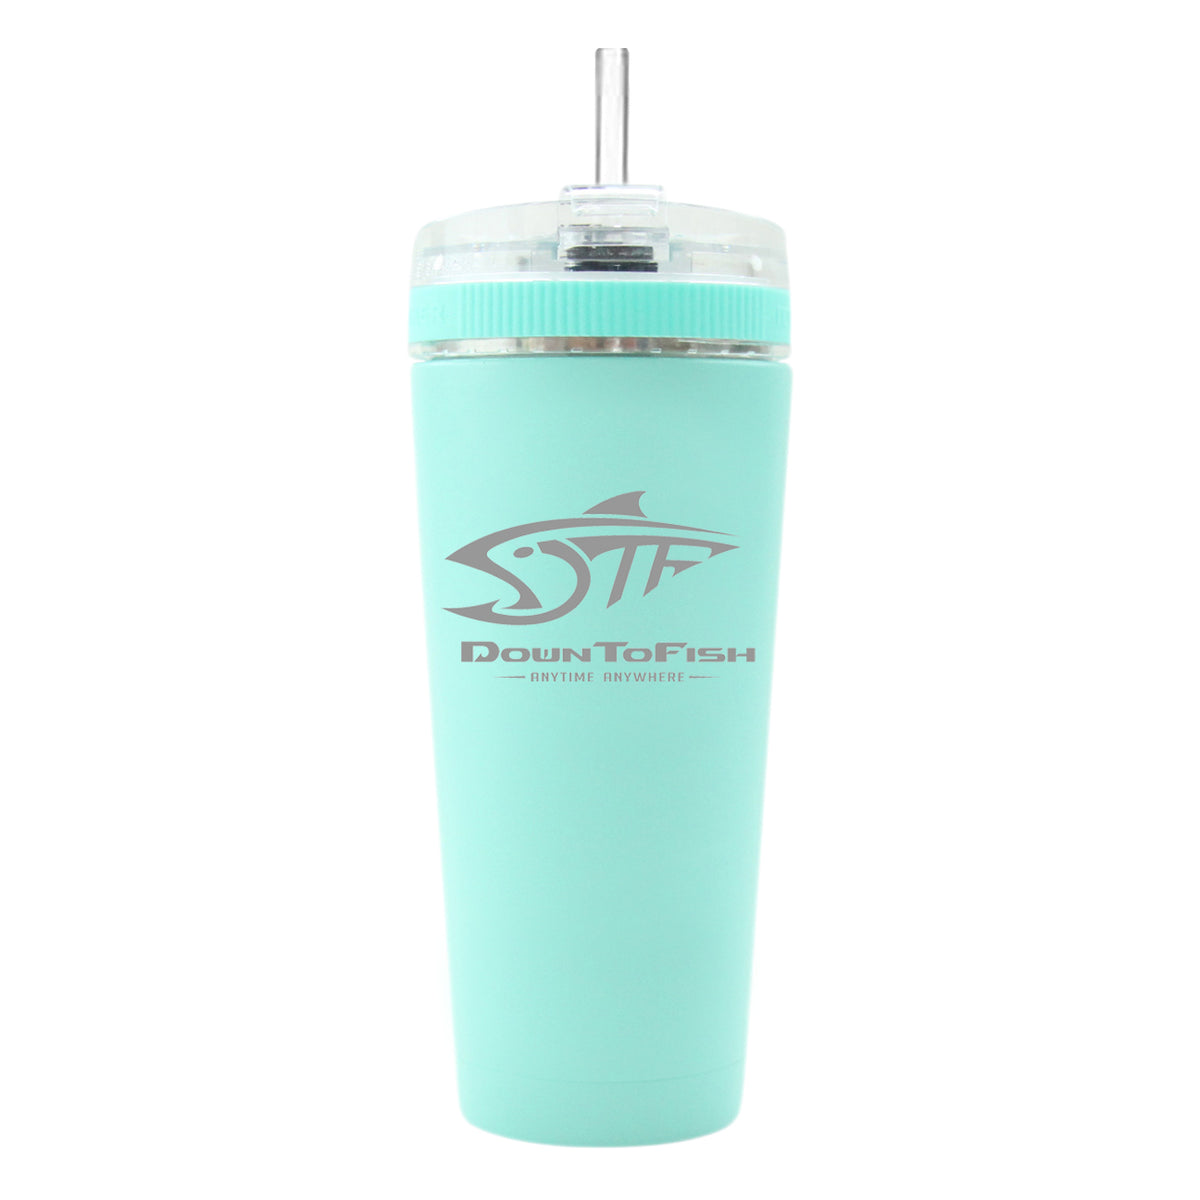 20oz DTF Bluetooth Bump Bottle – DTF Down To Fish